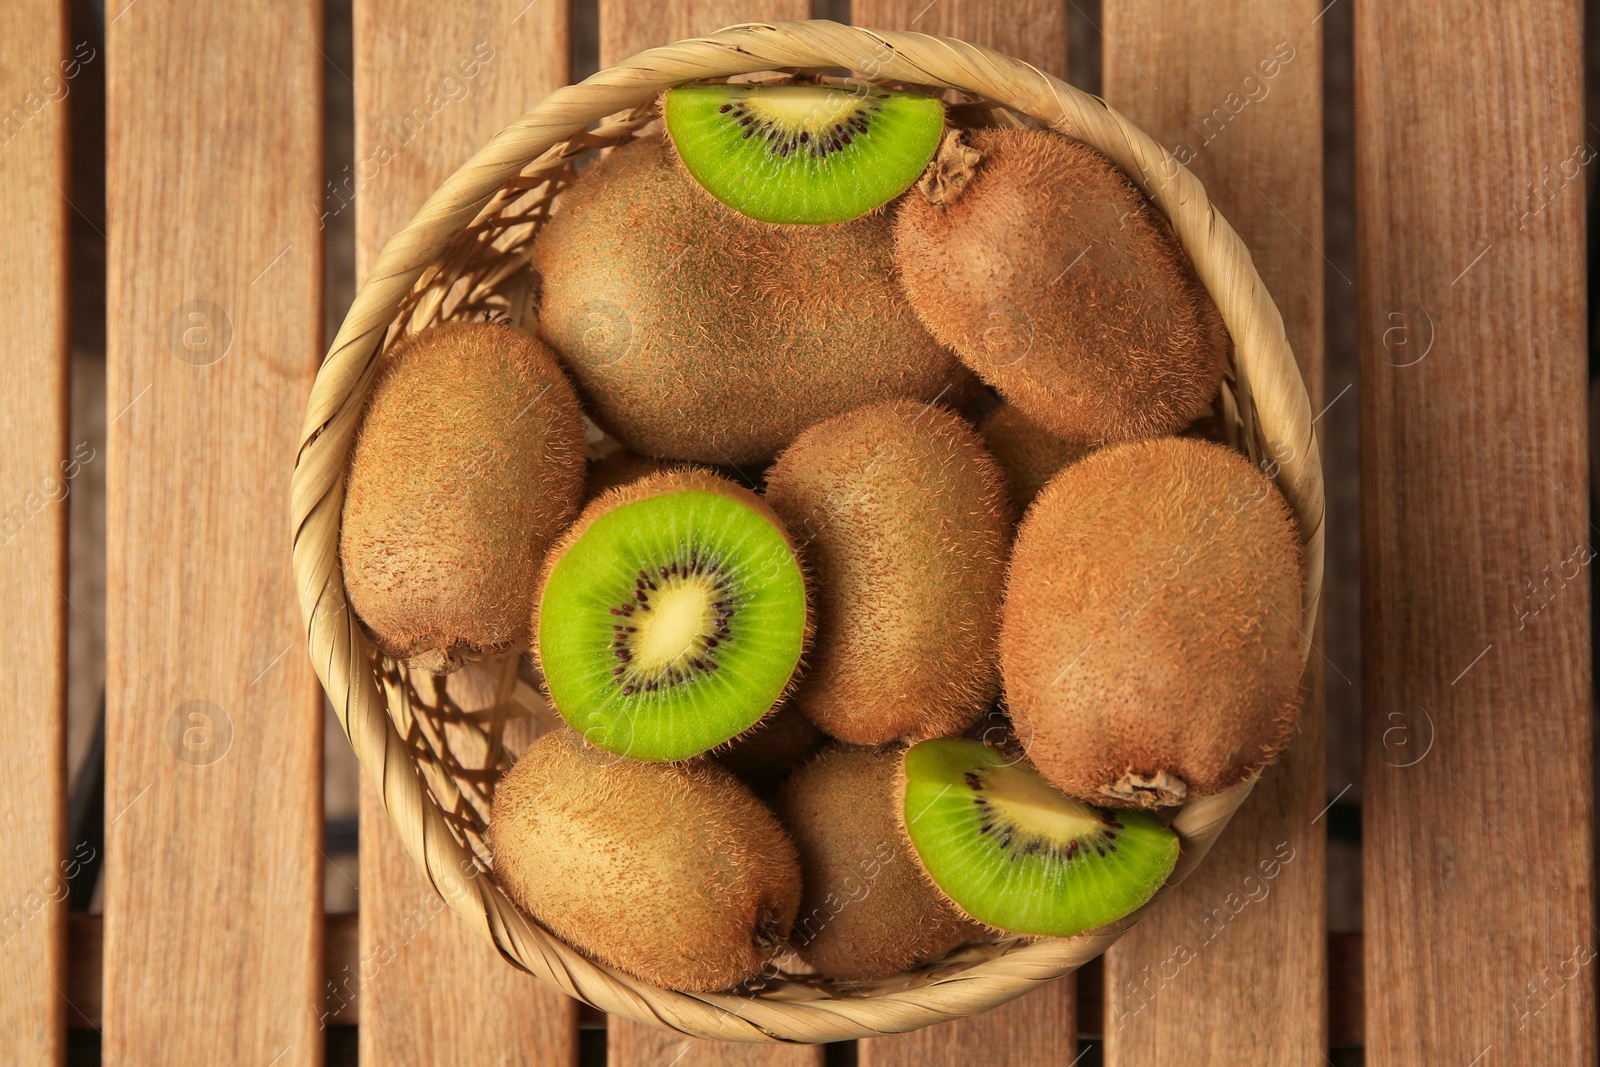 Photo of Wicker basket with whole and cut kiwis on wooden table, top view